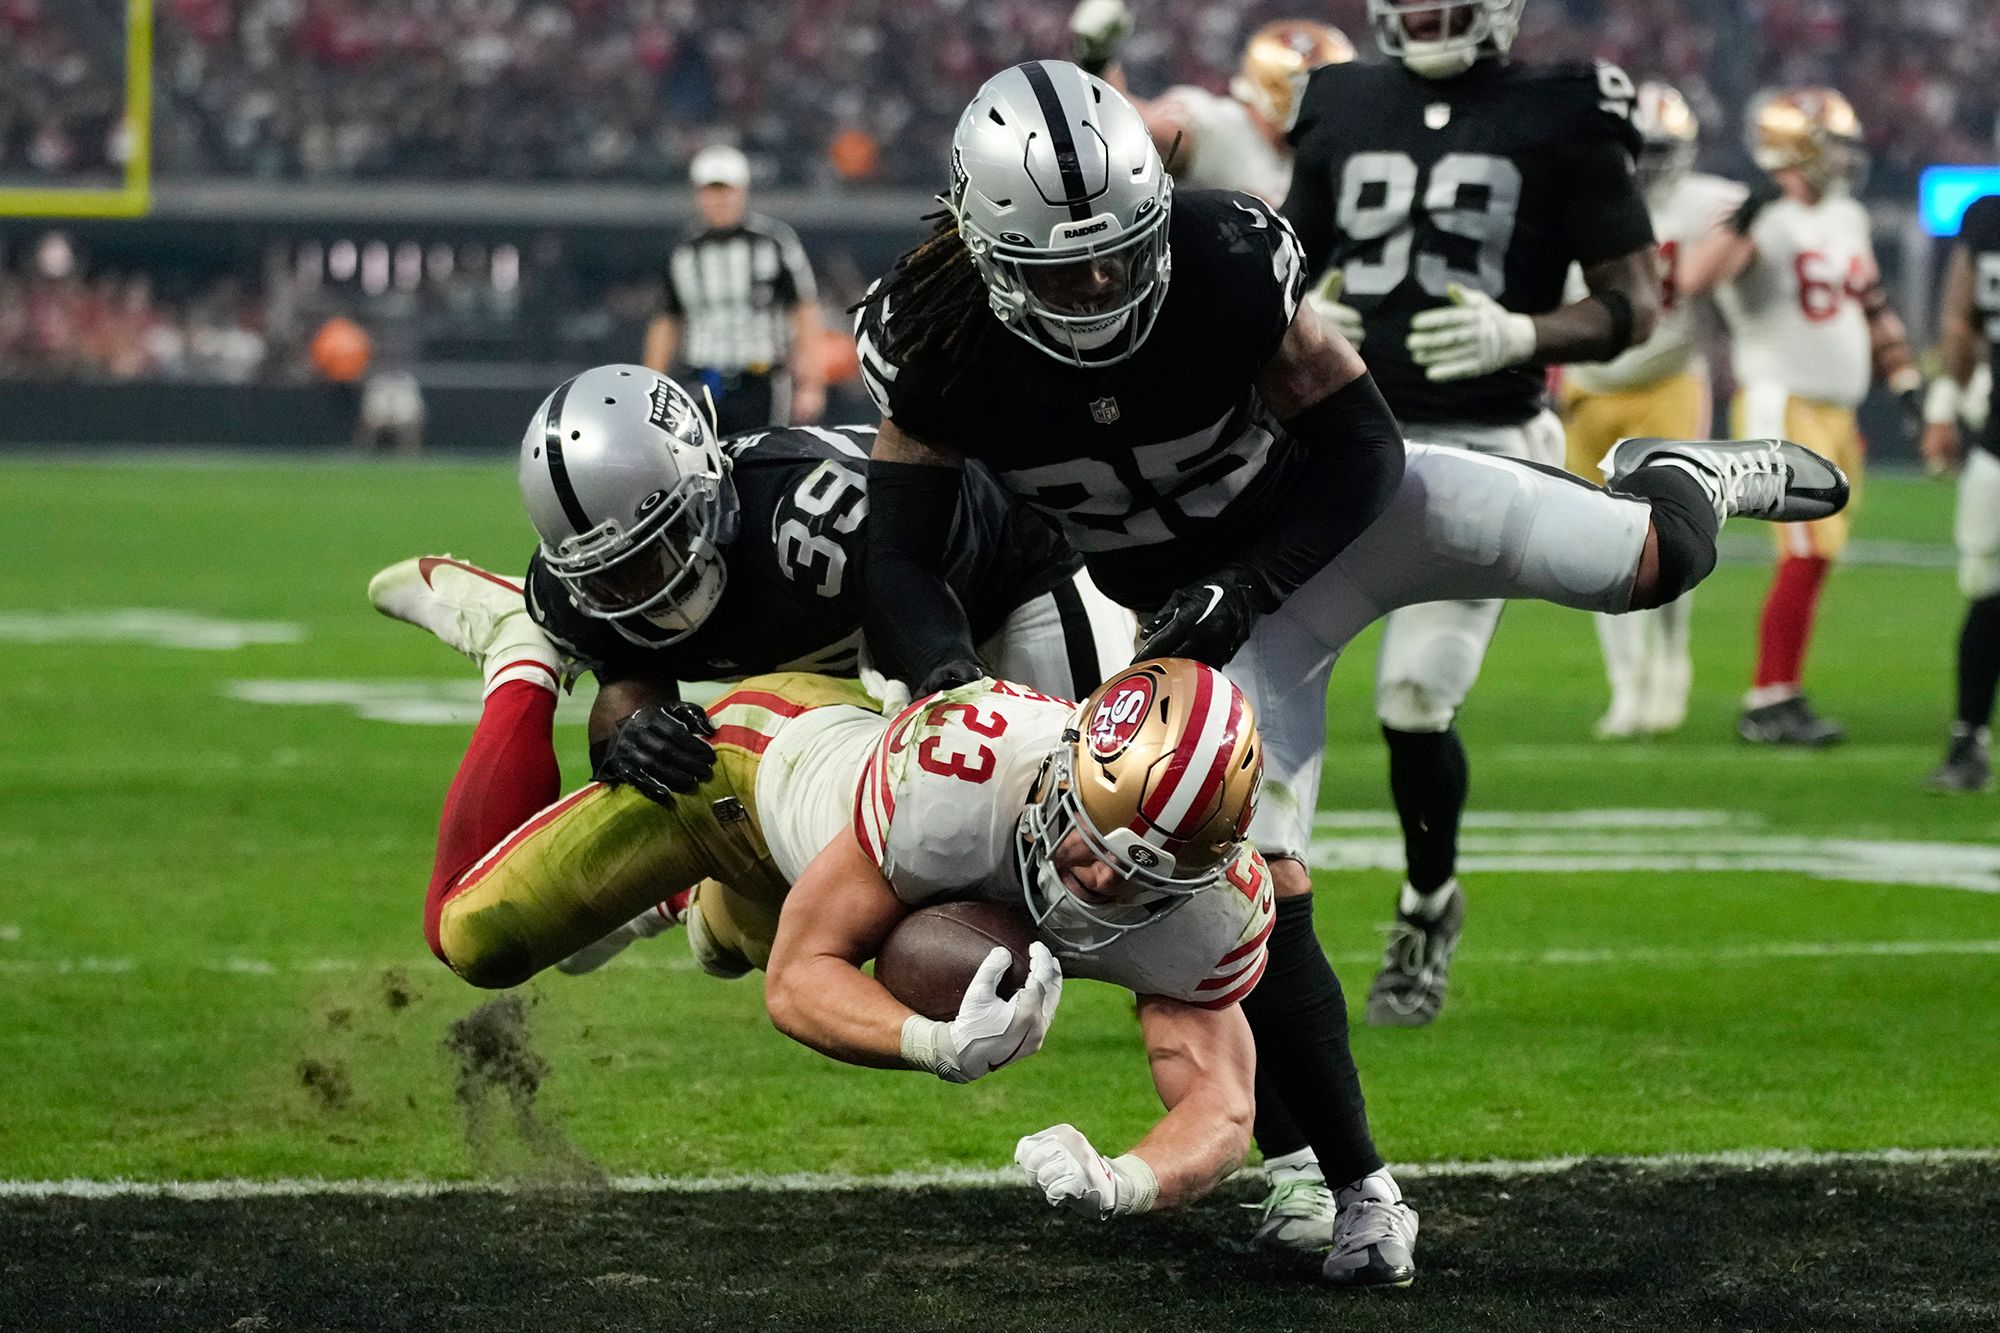 San Francisco running back Christian McCaffrey rumbles into the end zone against Las Vegas on January 1. McCaffrey and the Niners won 37-34 in overtime.